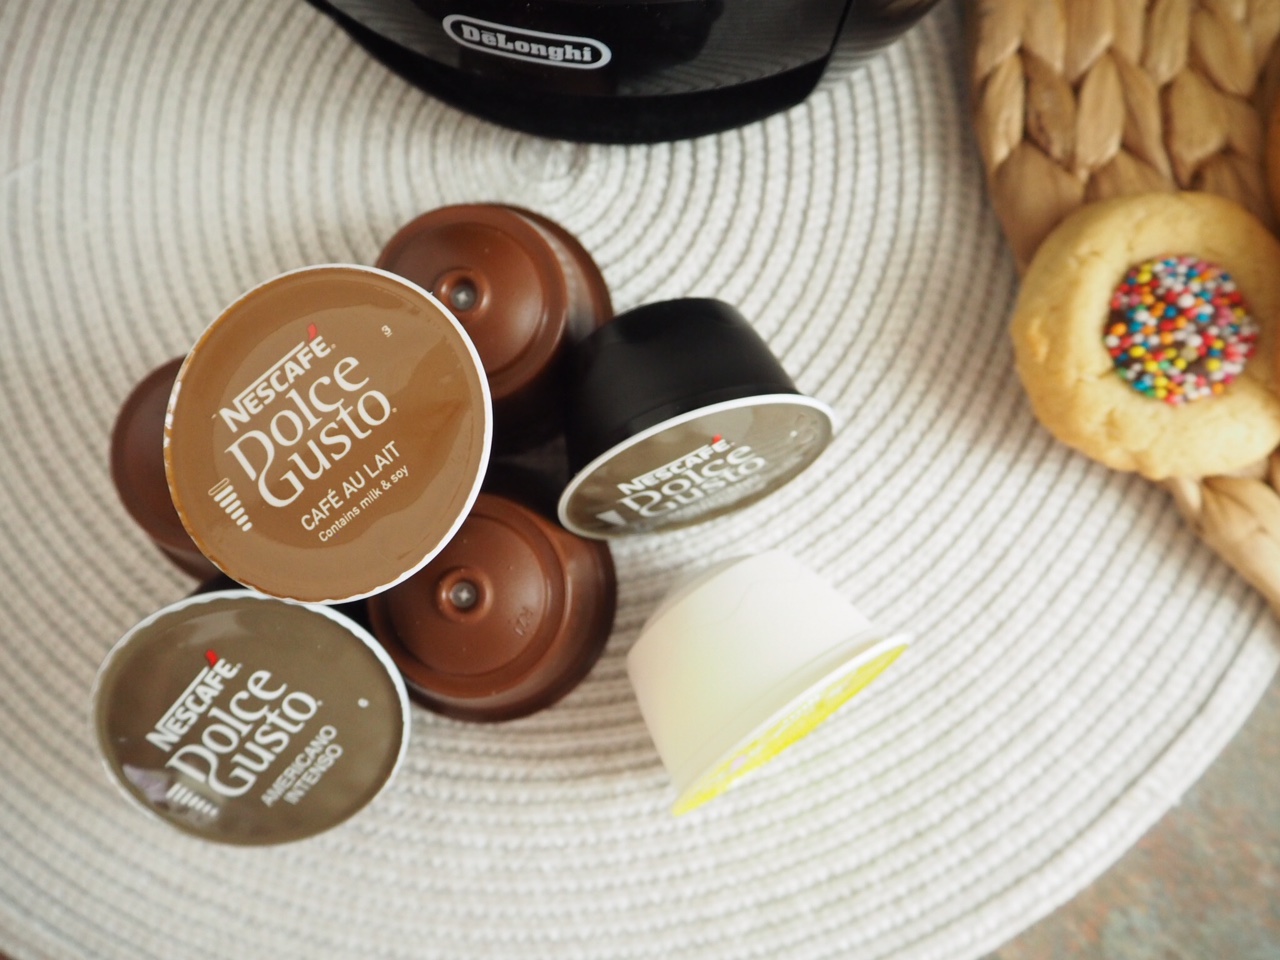 Nescafe Dolce Gusto Pods are now Recyclable